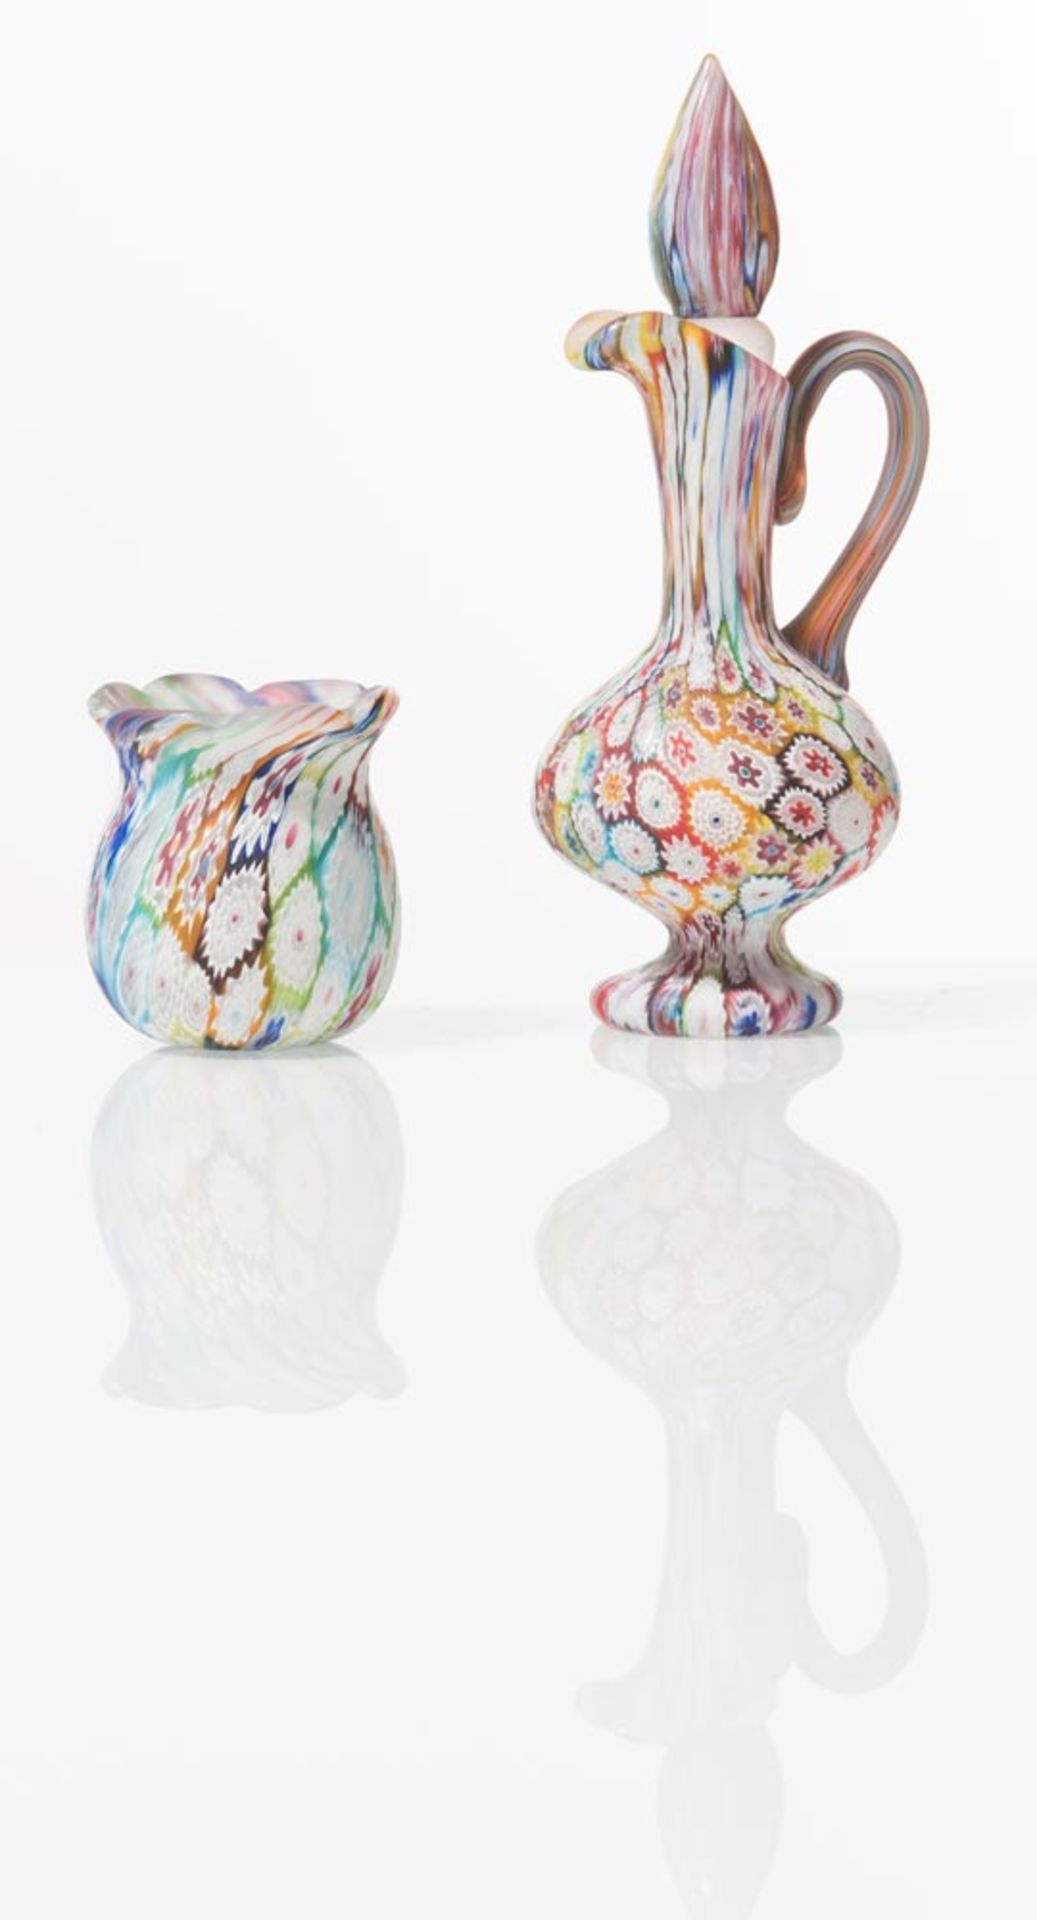 Toso Brothers, Murano, Murrine glass small ewer with cap and vase, early 20th Century.